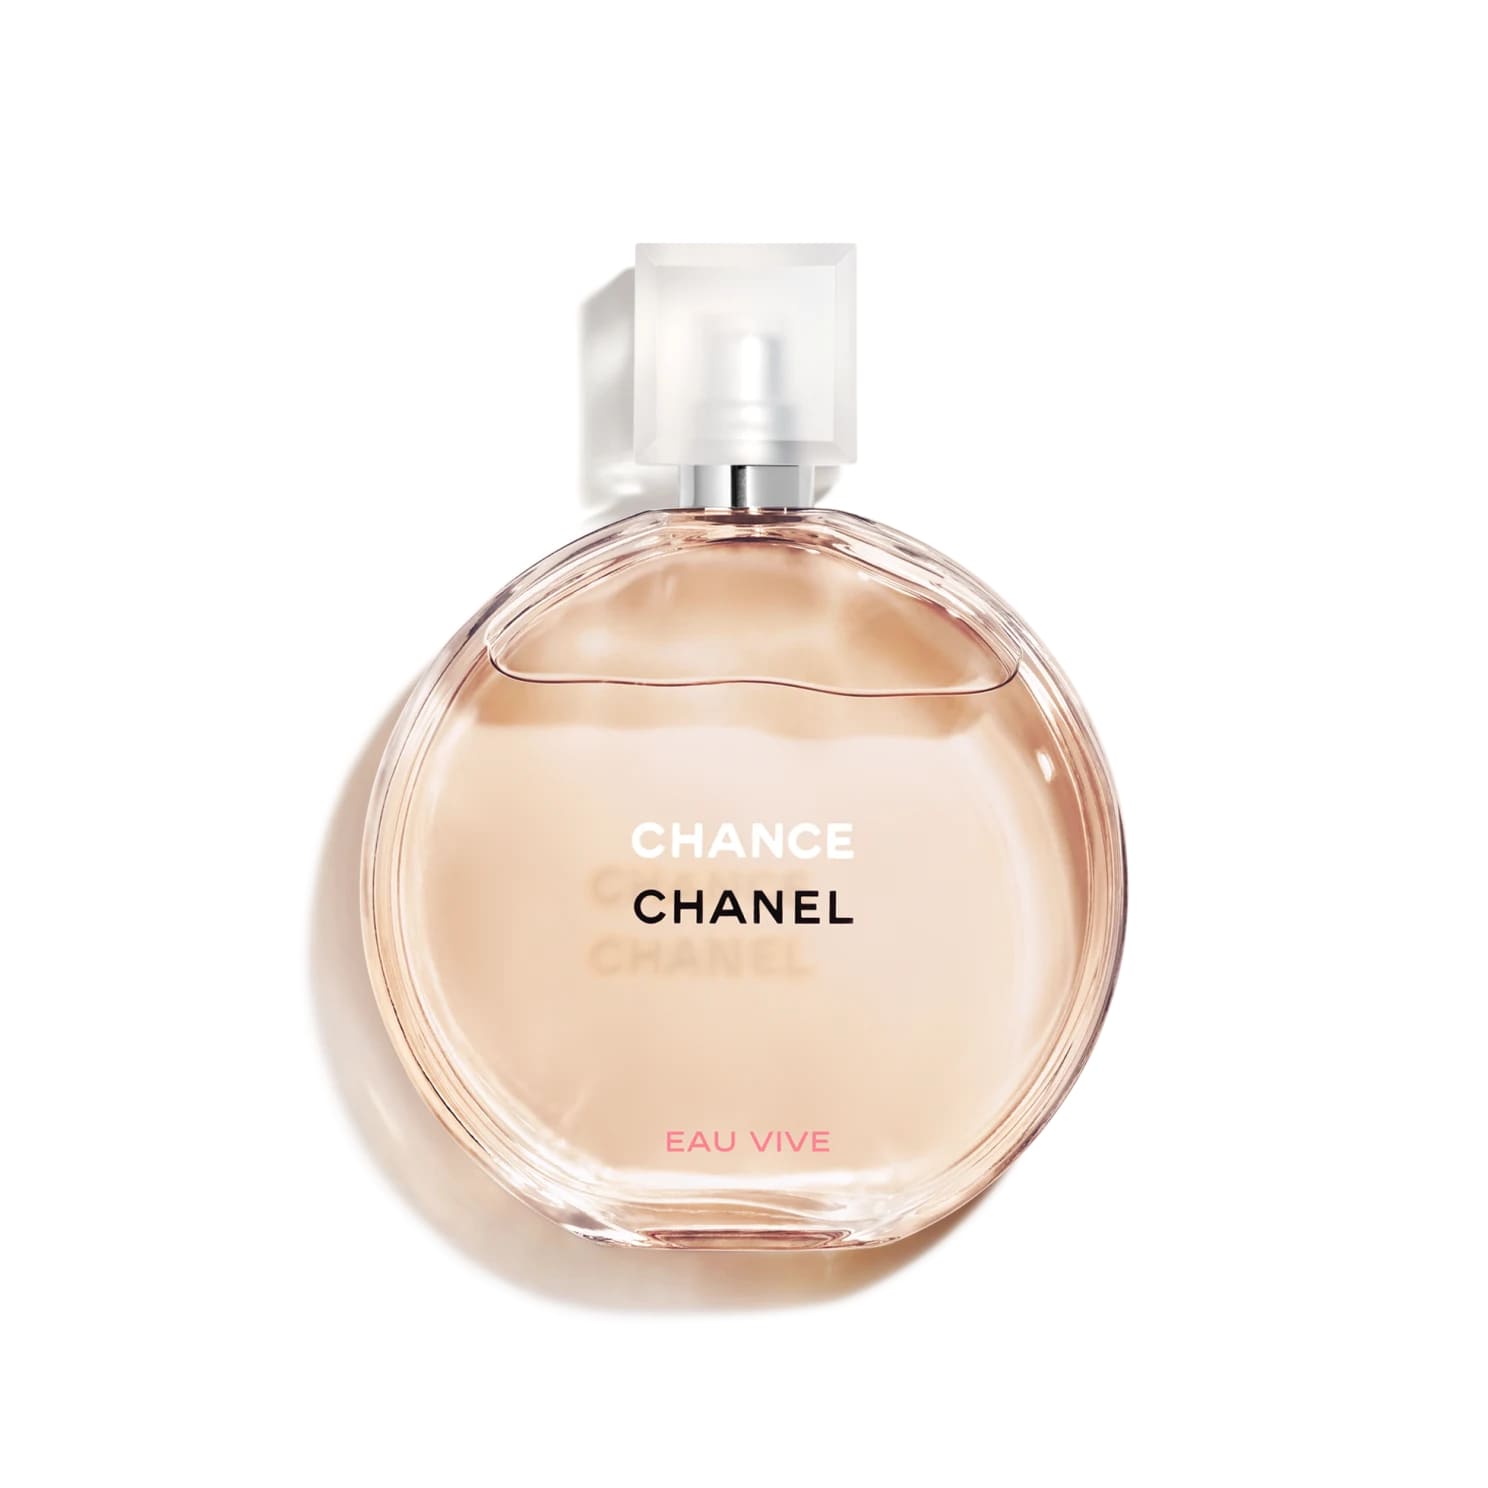 Chance Eau Vive Perfume EDT Spray for Women by Chanel